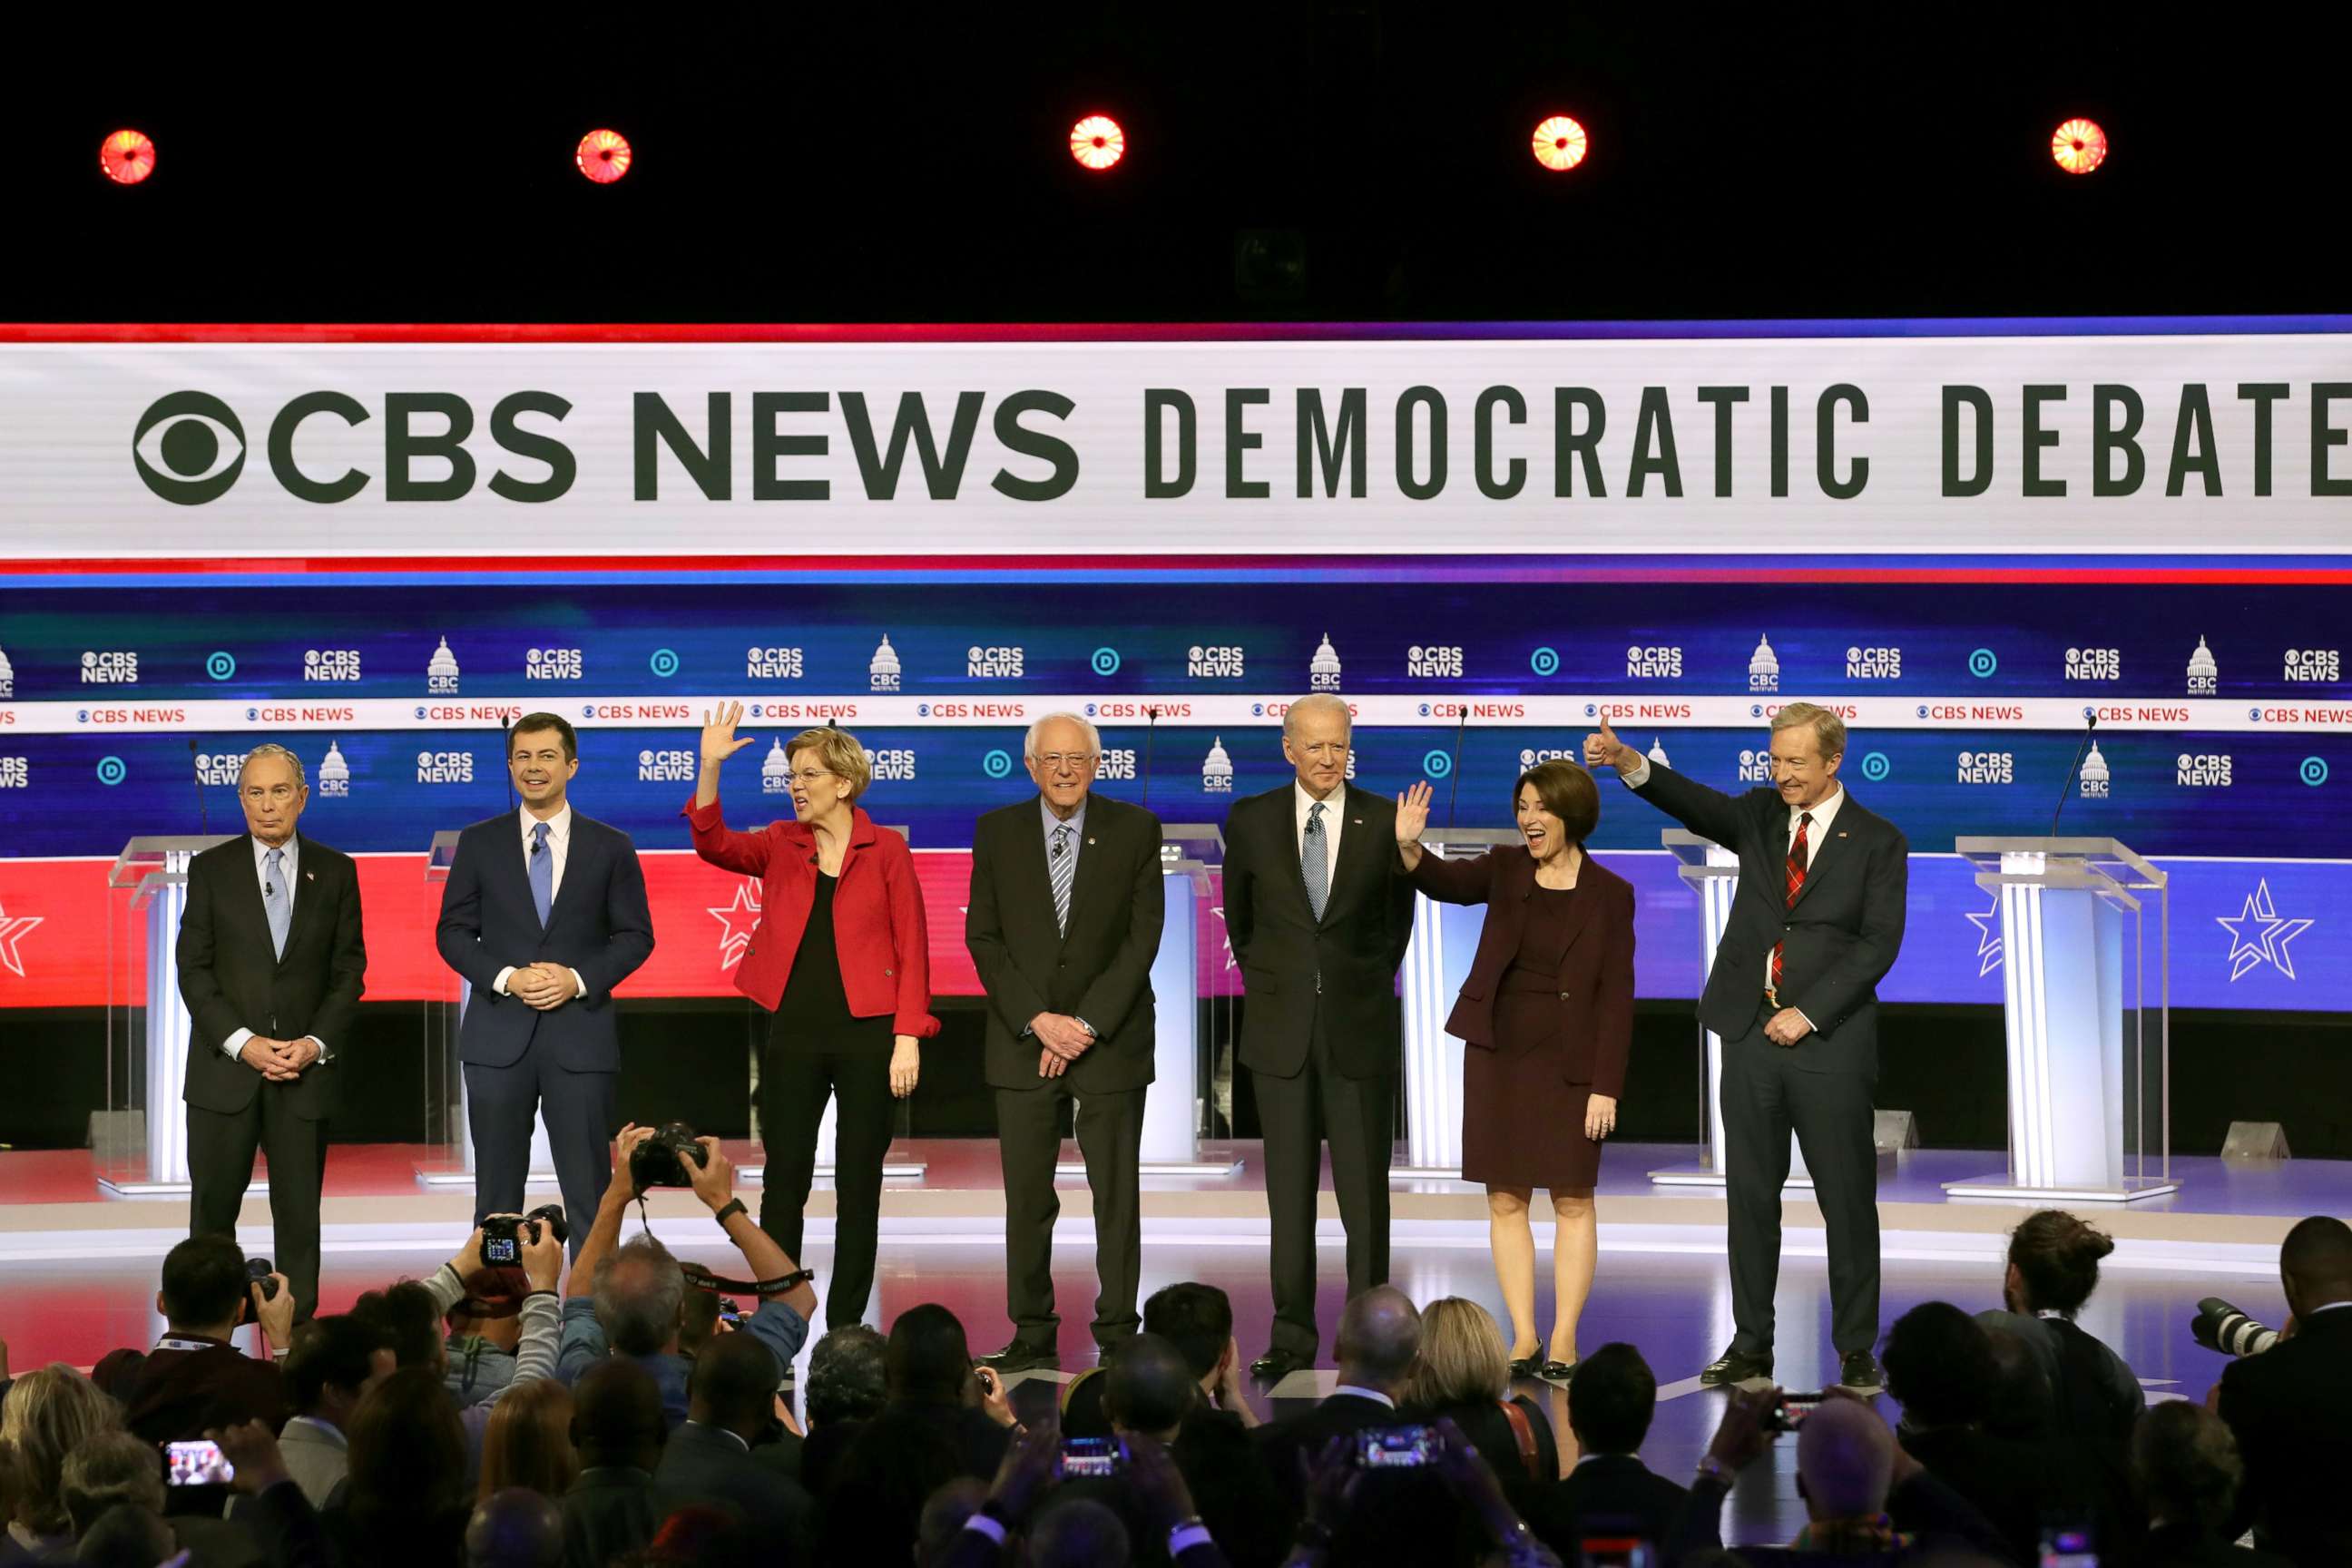 PHOTO: Democratic presidential hopefuls arrive on stage for the tenth Democratic primary debate at the Gaillard Center in Charleston, South Carolina, Feb. 25, 2020.